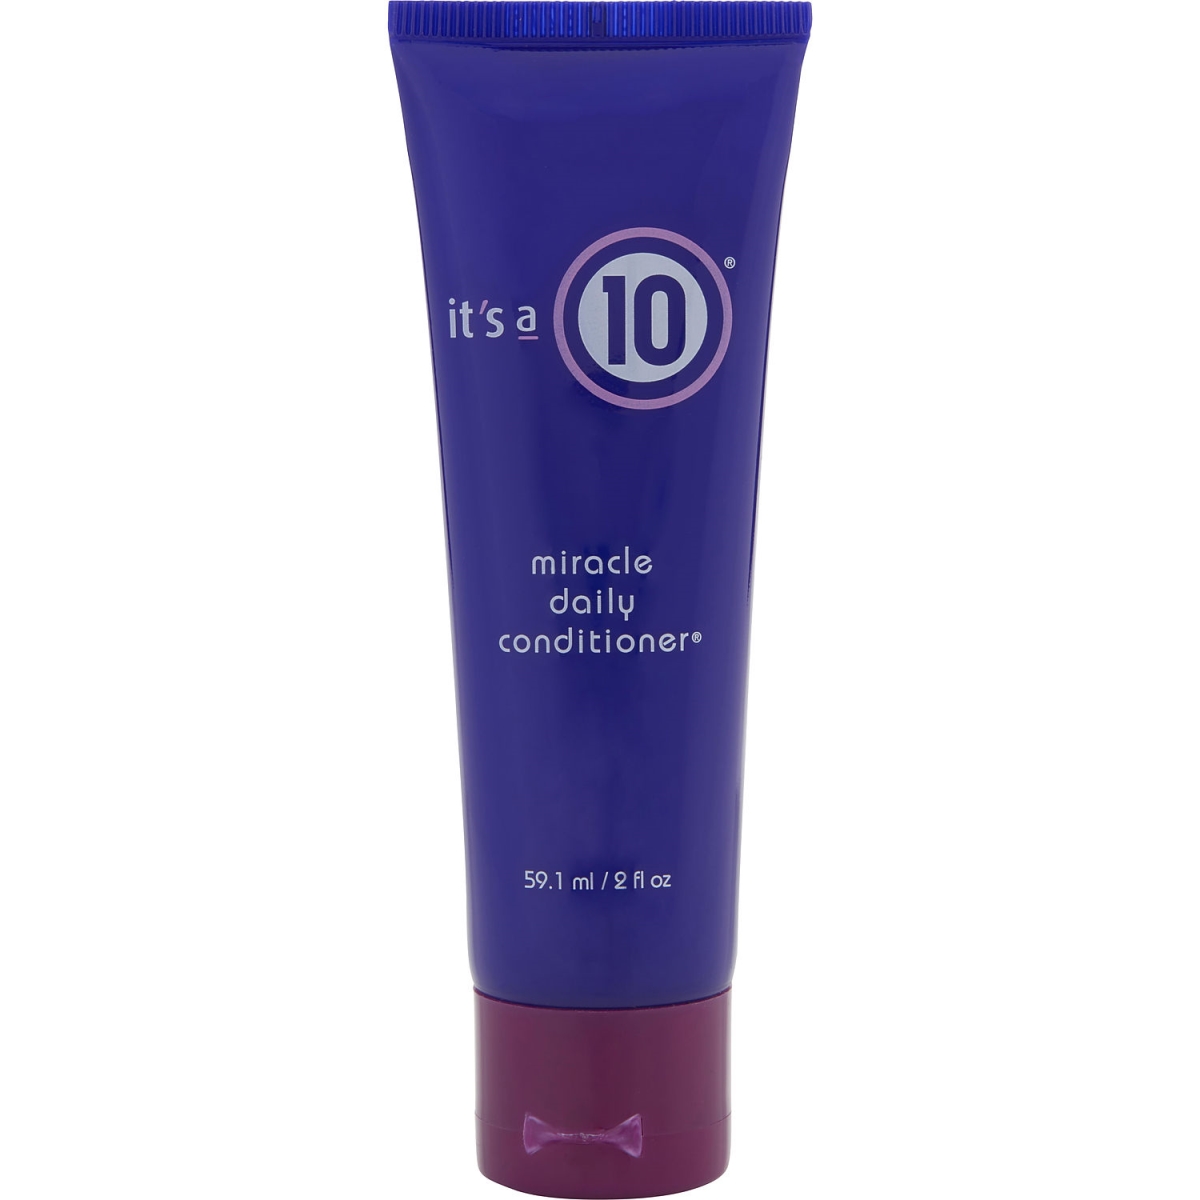 Its A 10 340070 2 Oz Unisex Miracle Daily Hair Conditioner